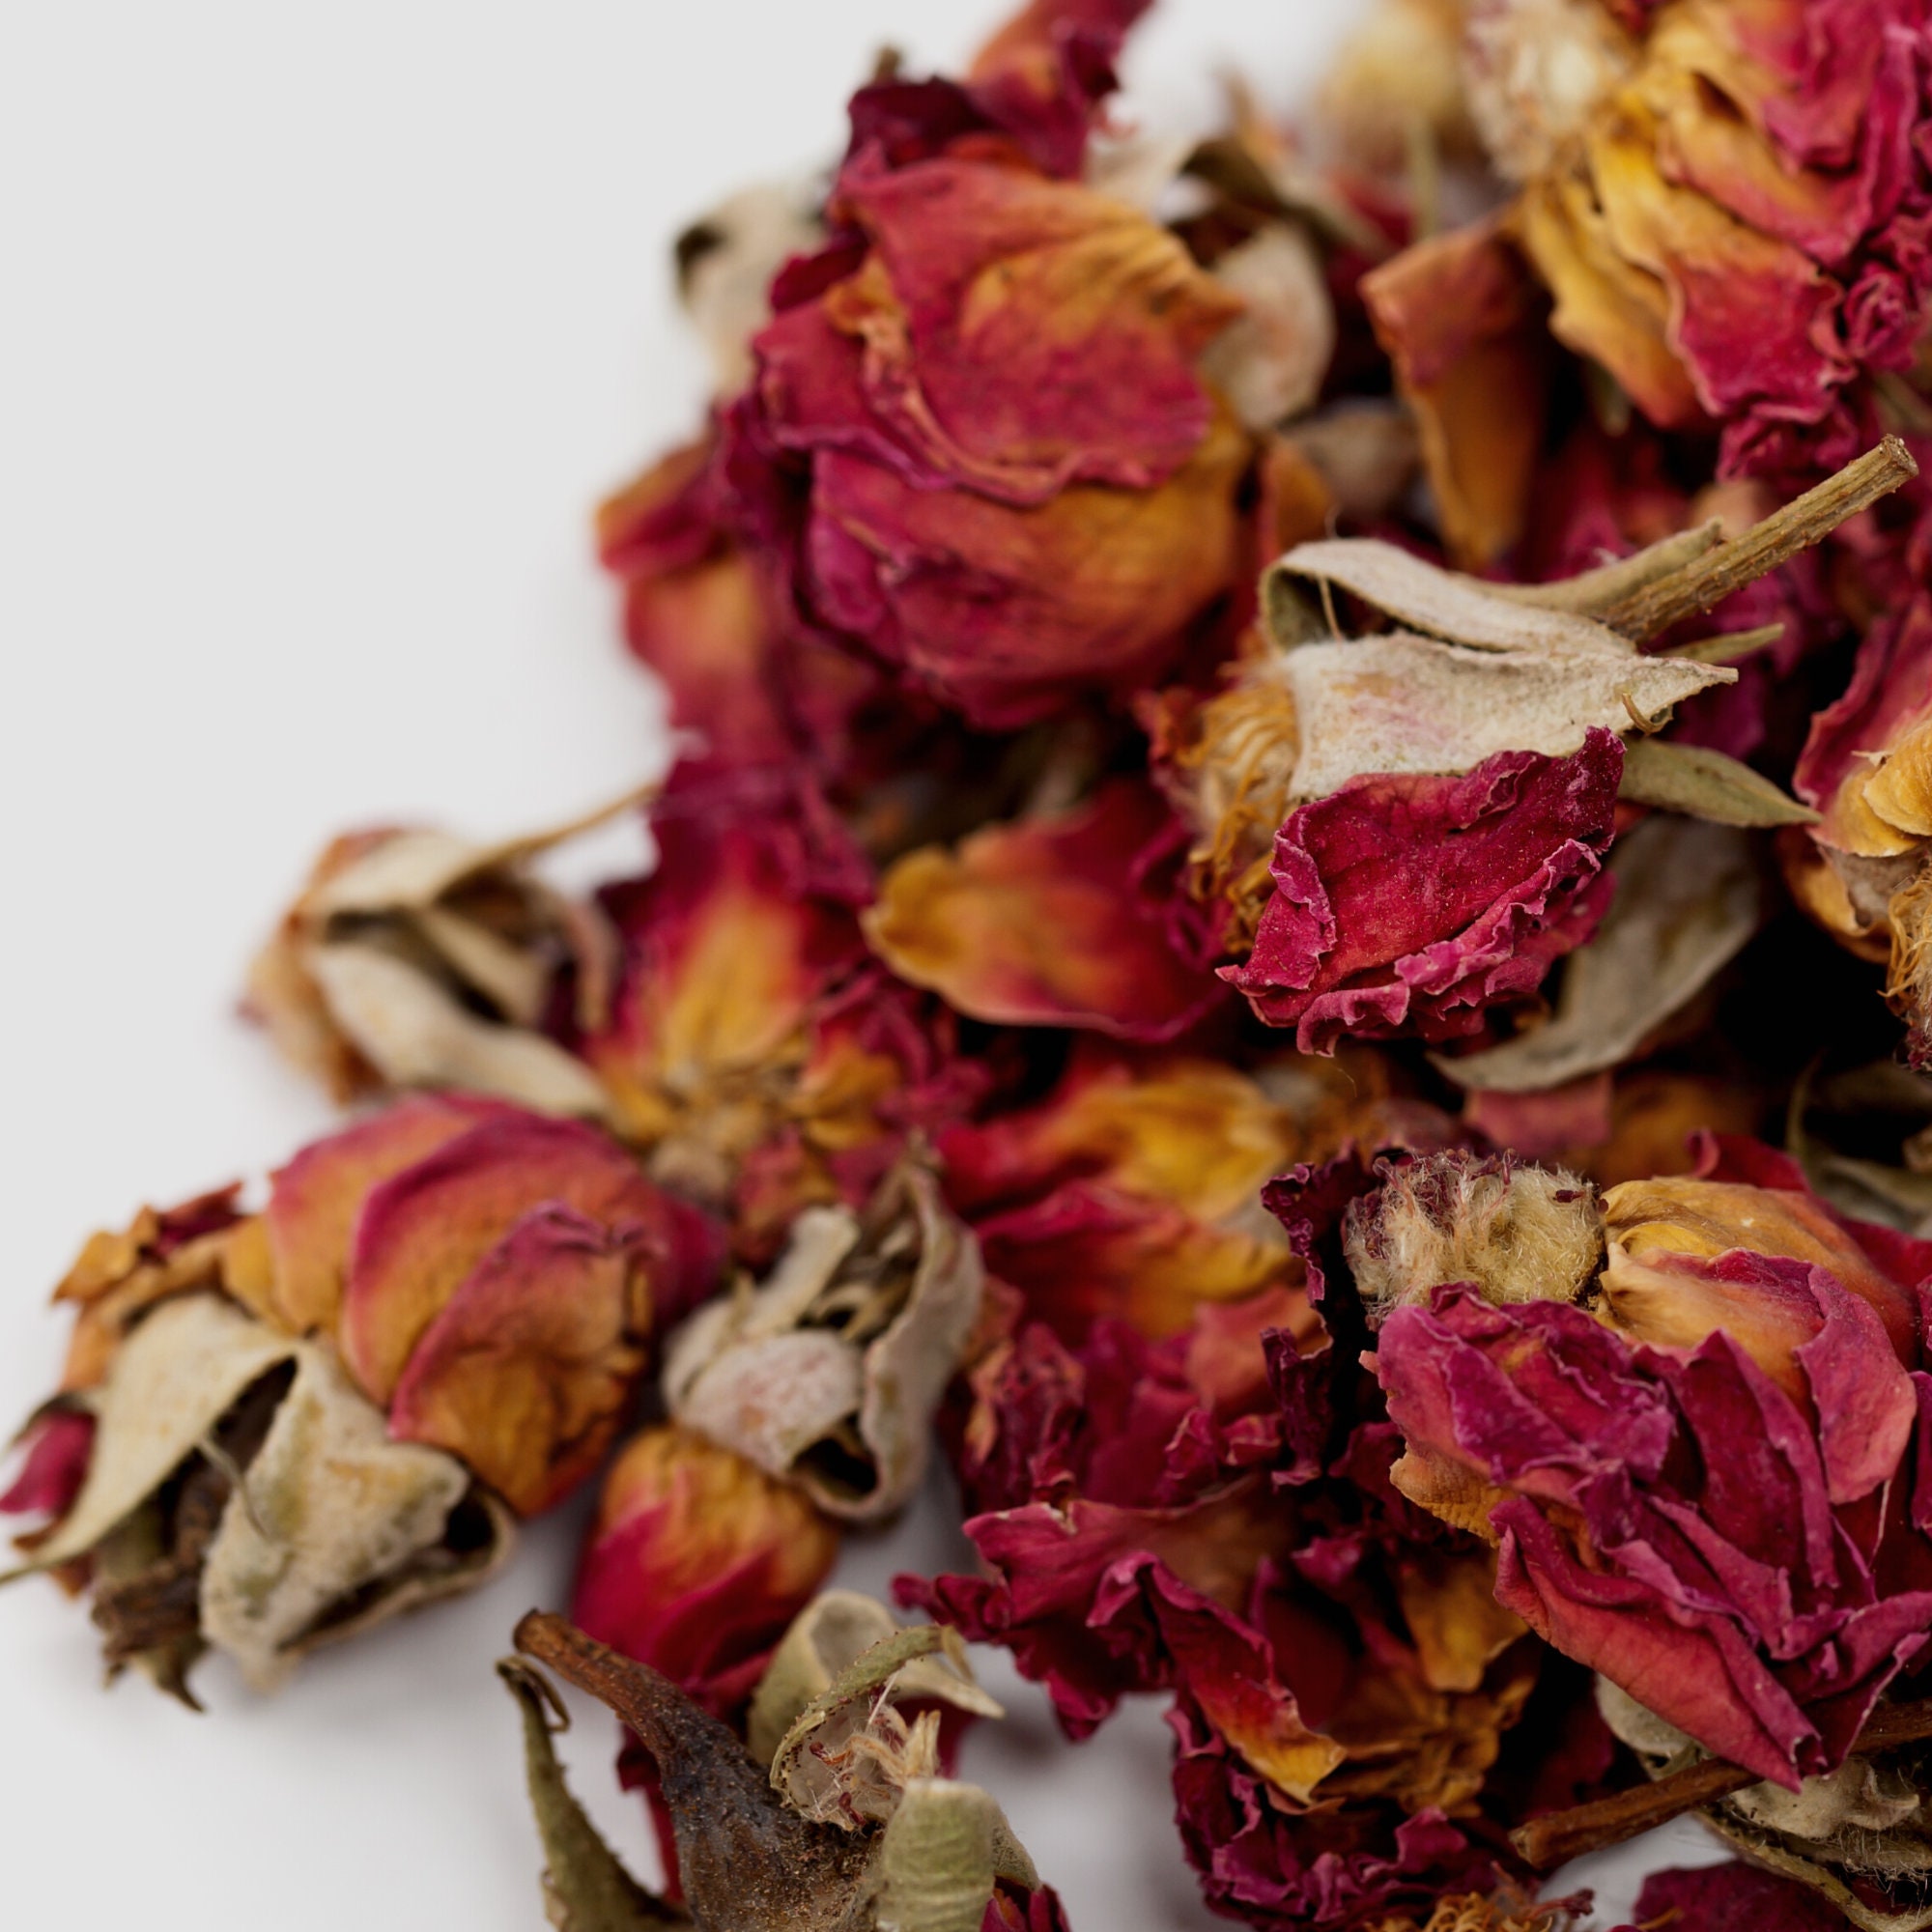 Fragrant Natural Red Rose Buds Rose Petals Organic Dried Flowers Wholesale,  Culinary Food Grade - 4 OZ 